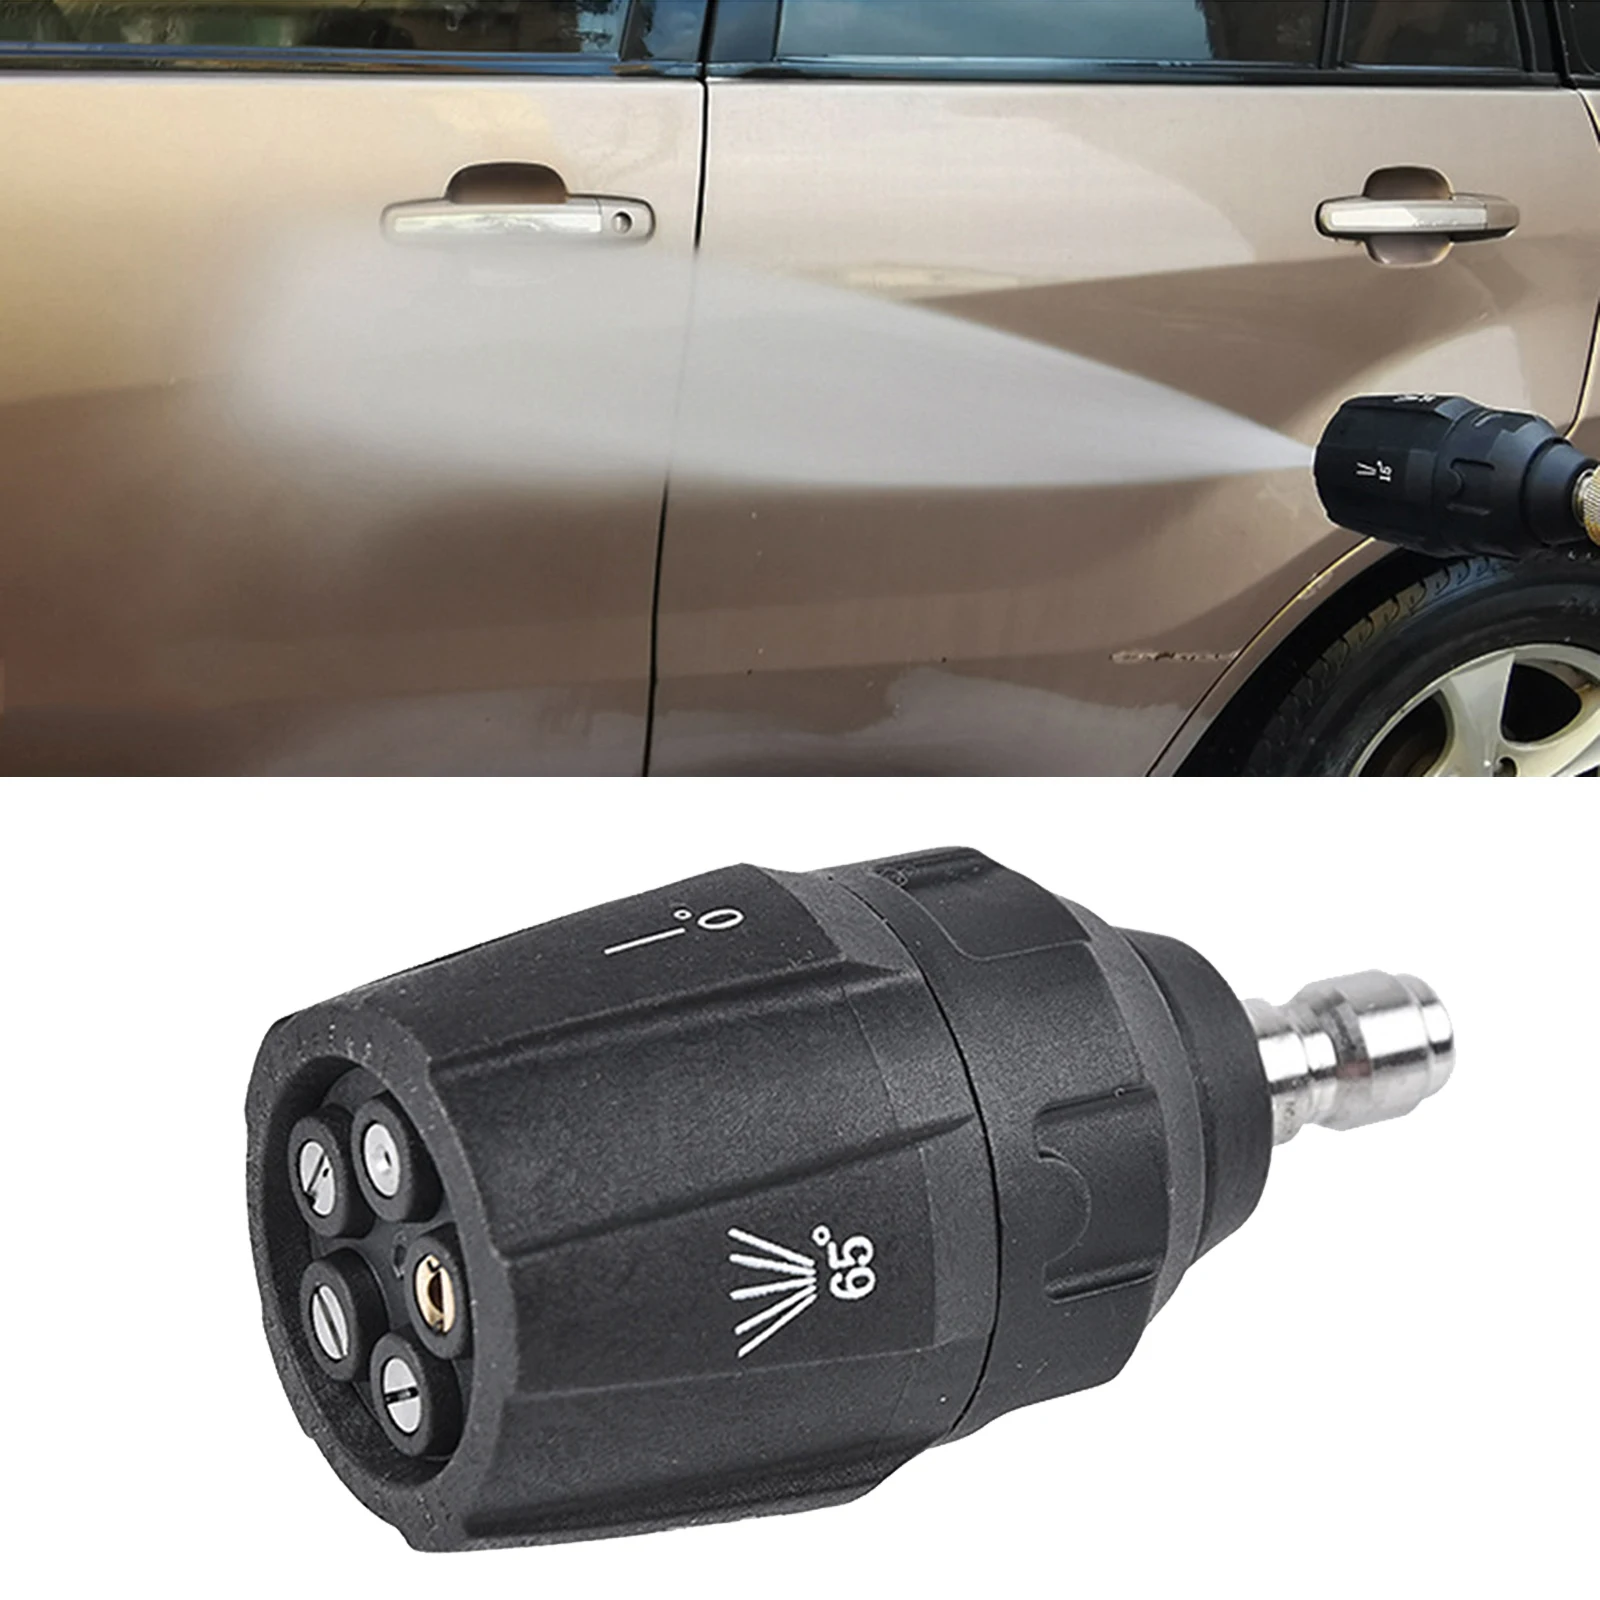 Quick-Connect Nozzle for Pressure Washers up to 3600 PSI Multiple Degrees [